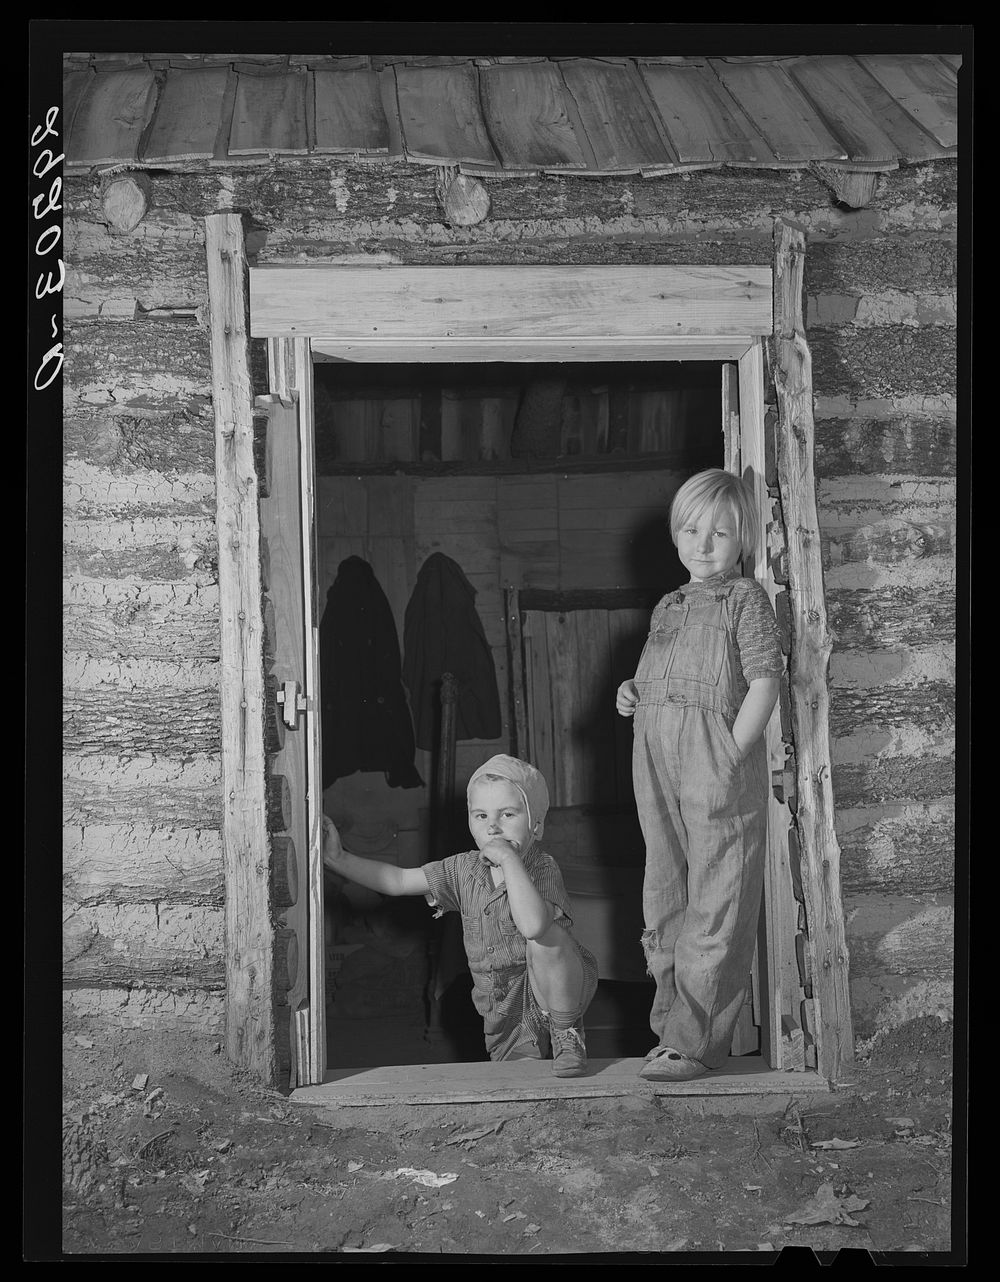 Children of evicted sharecropper. Butler County, Missouri. Sourced from the Library of Congress.